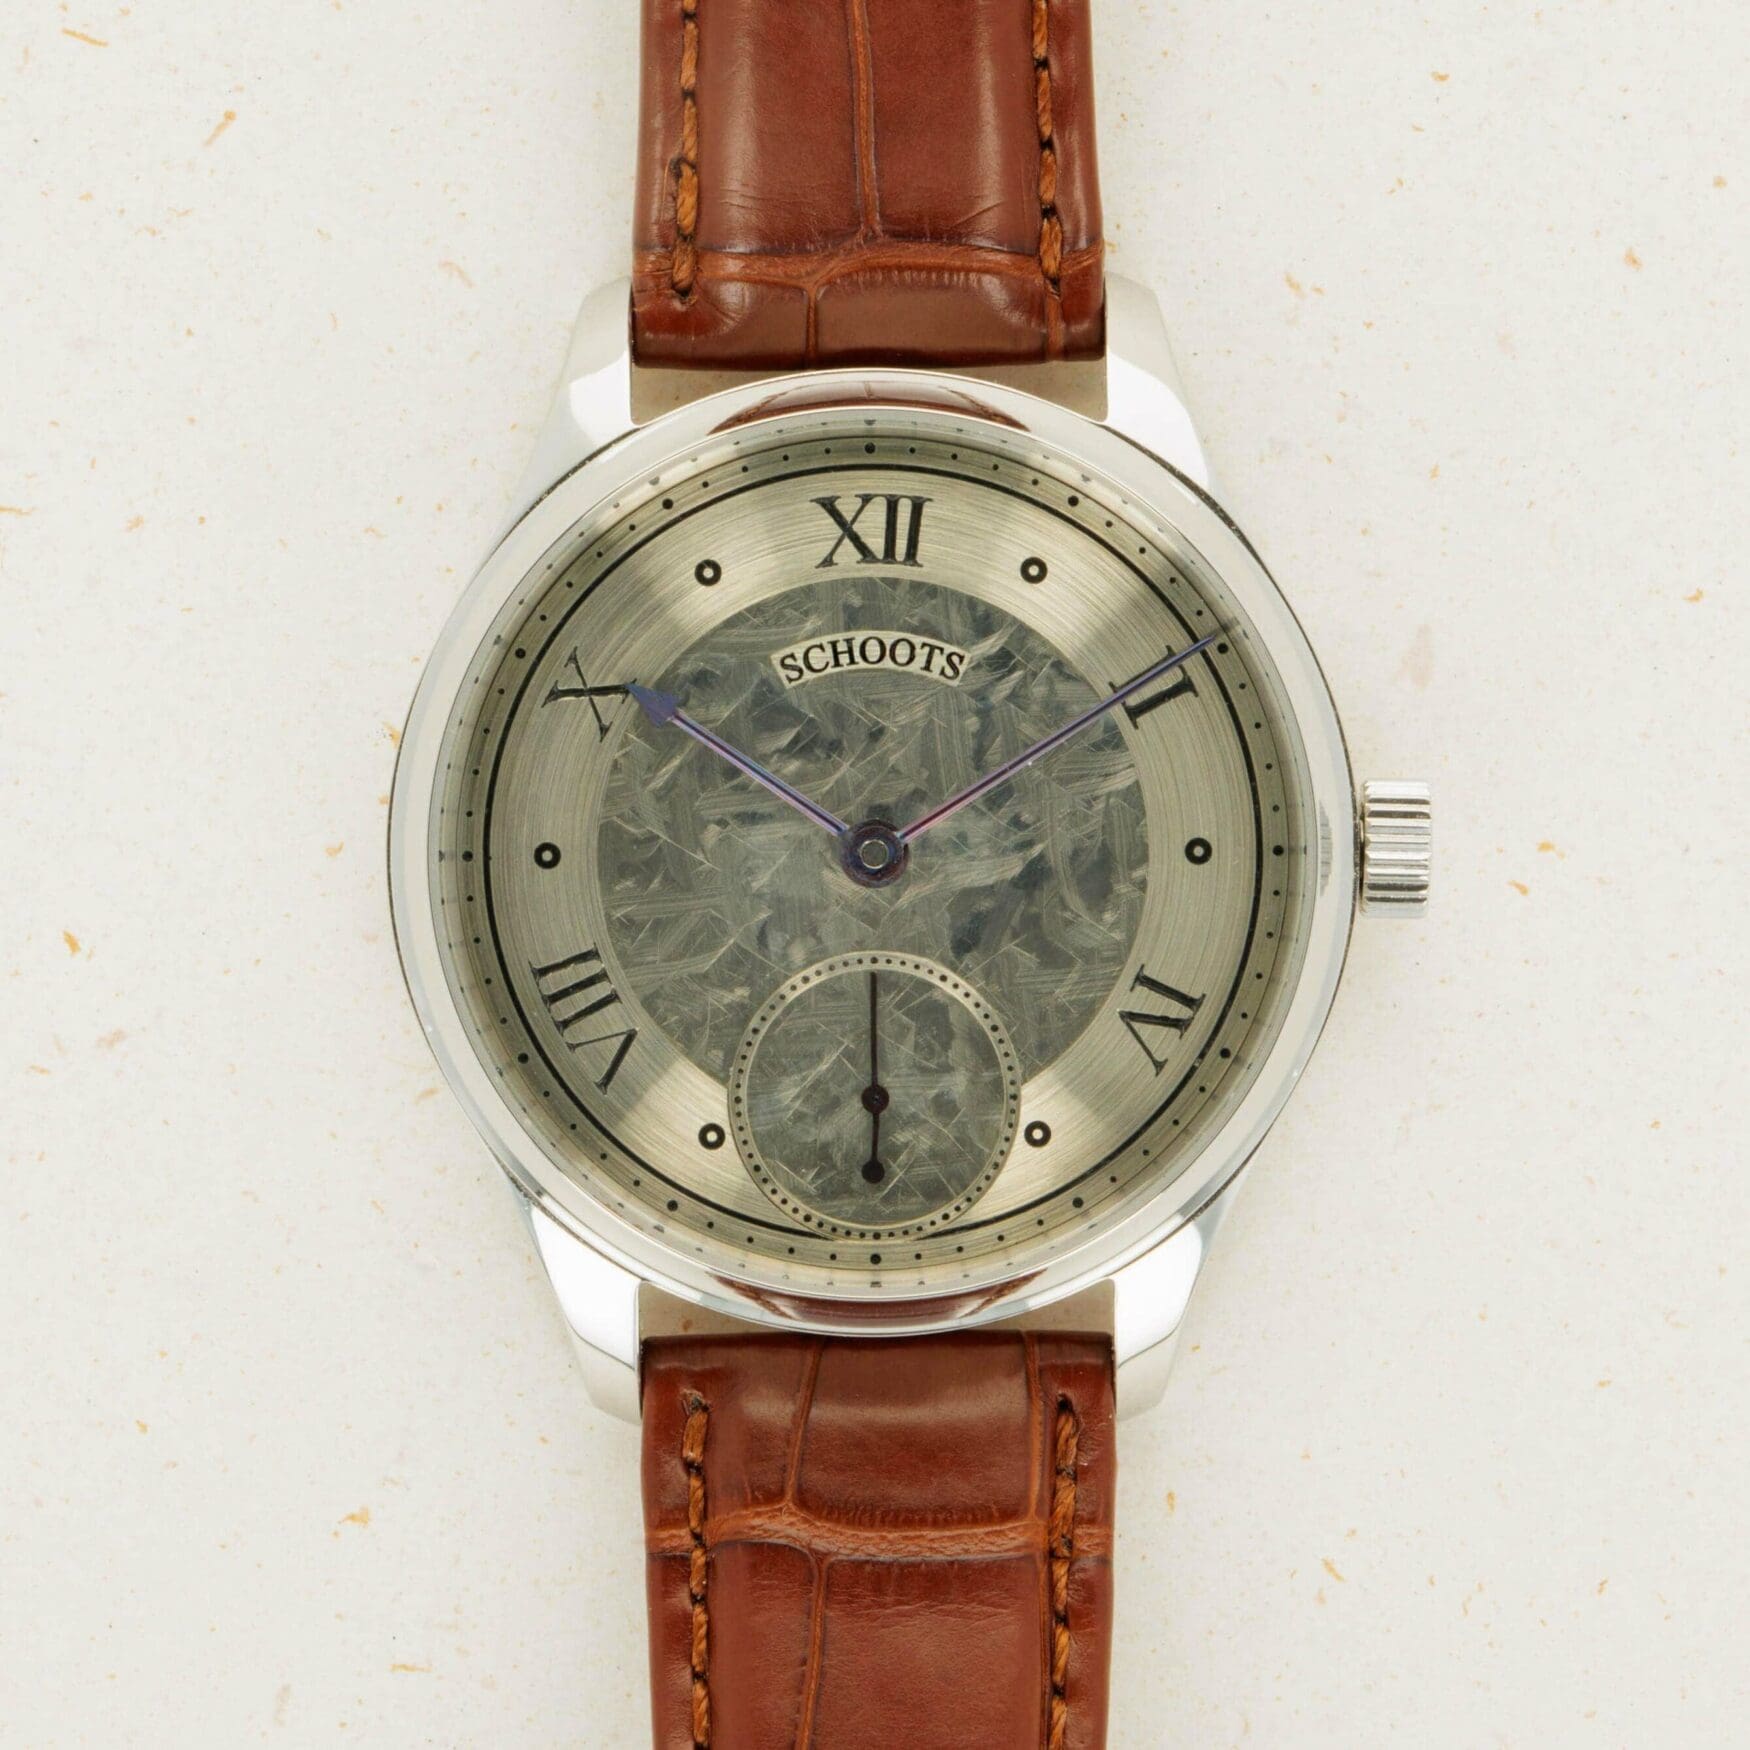 Australian independent watchmaker Reuben Schoots’ watch is on Loupe This – but I am the highest bidder so BACK OFF!